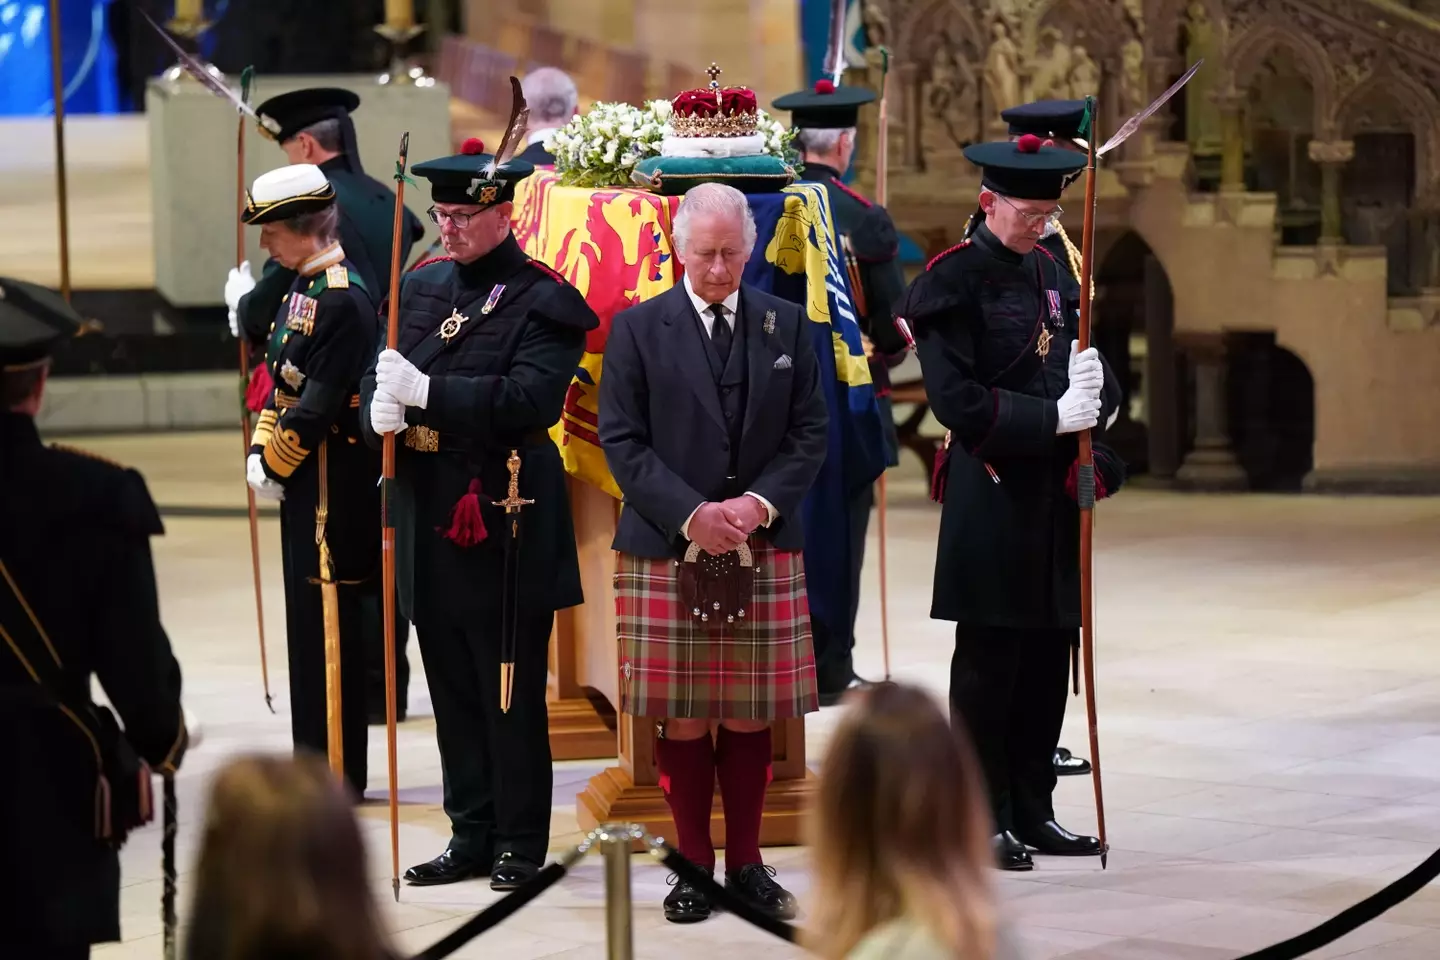 King Charles III, Princess Anne, Prince Andrew and Prince Edward stood vigil around the Queen's coffin.